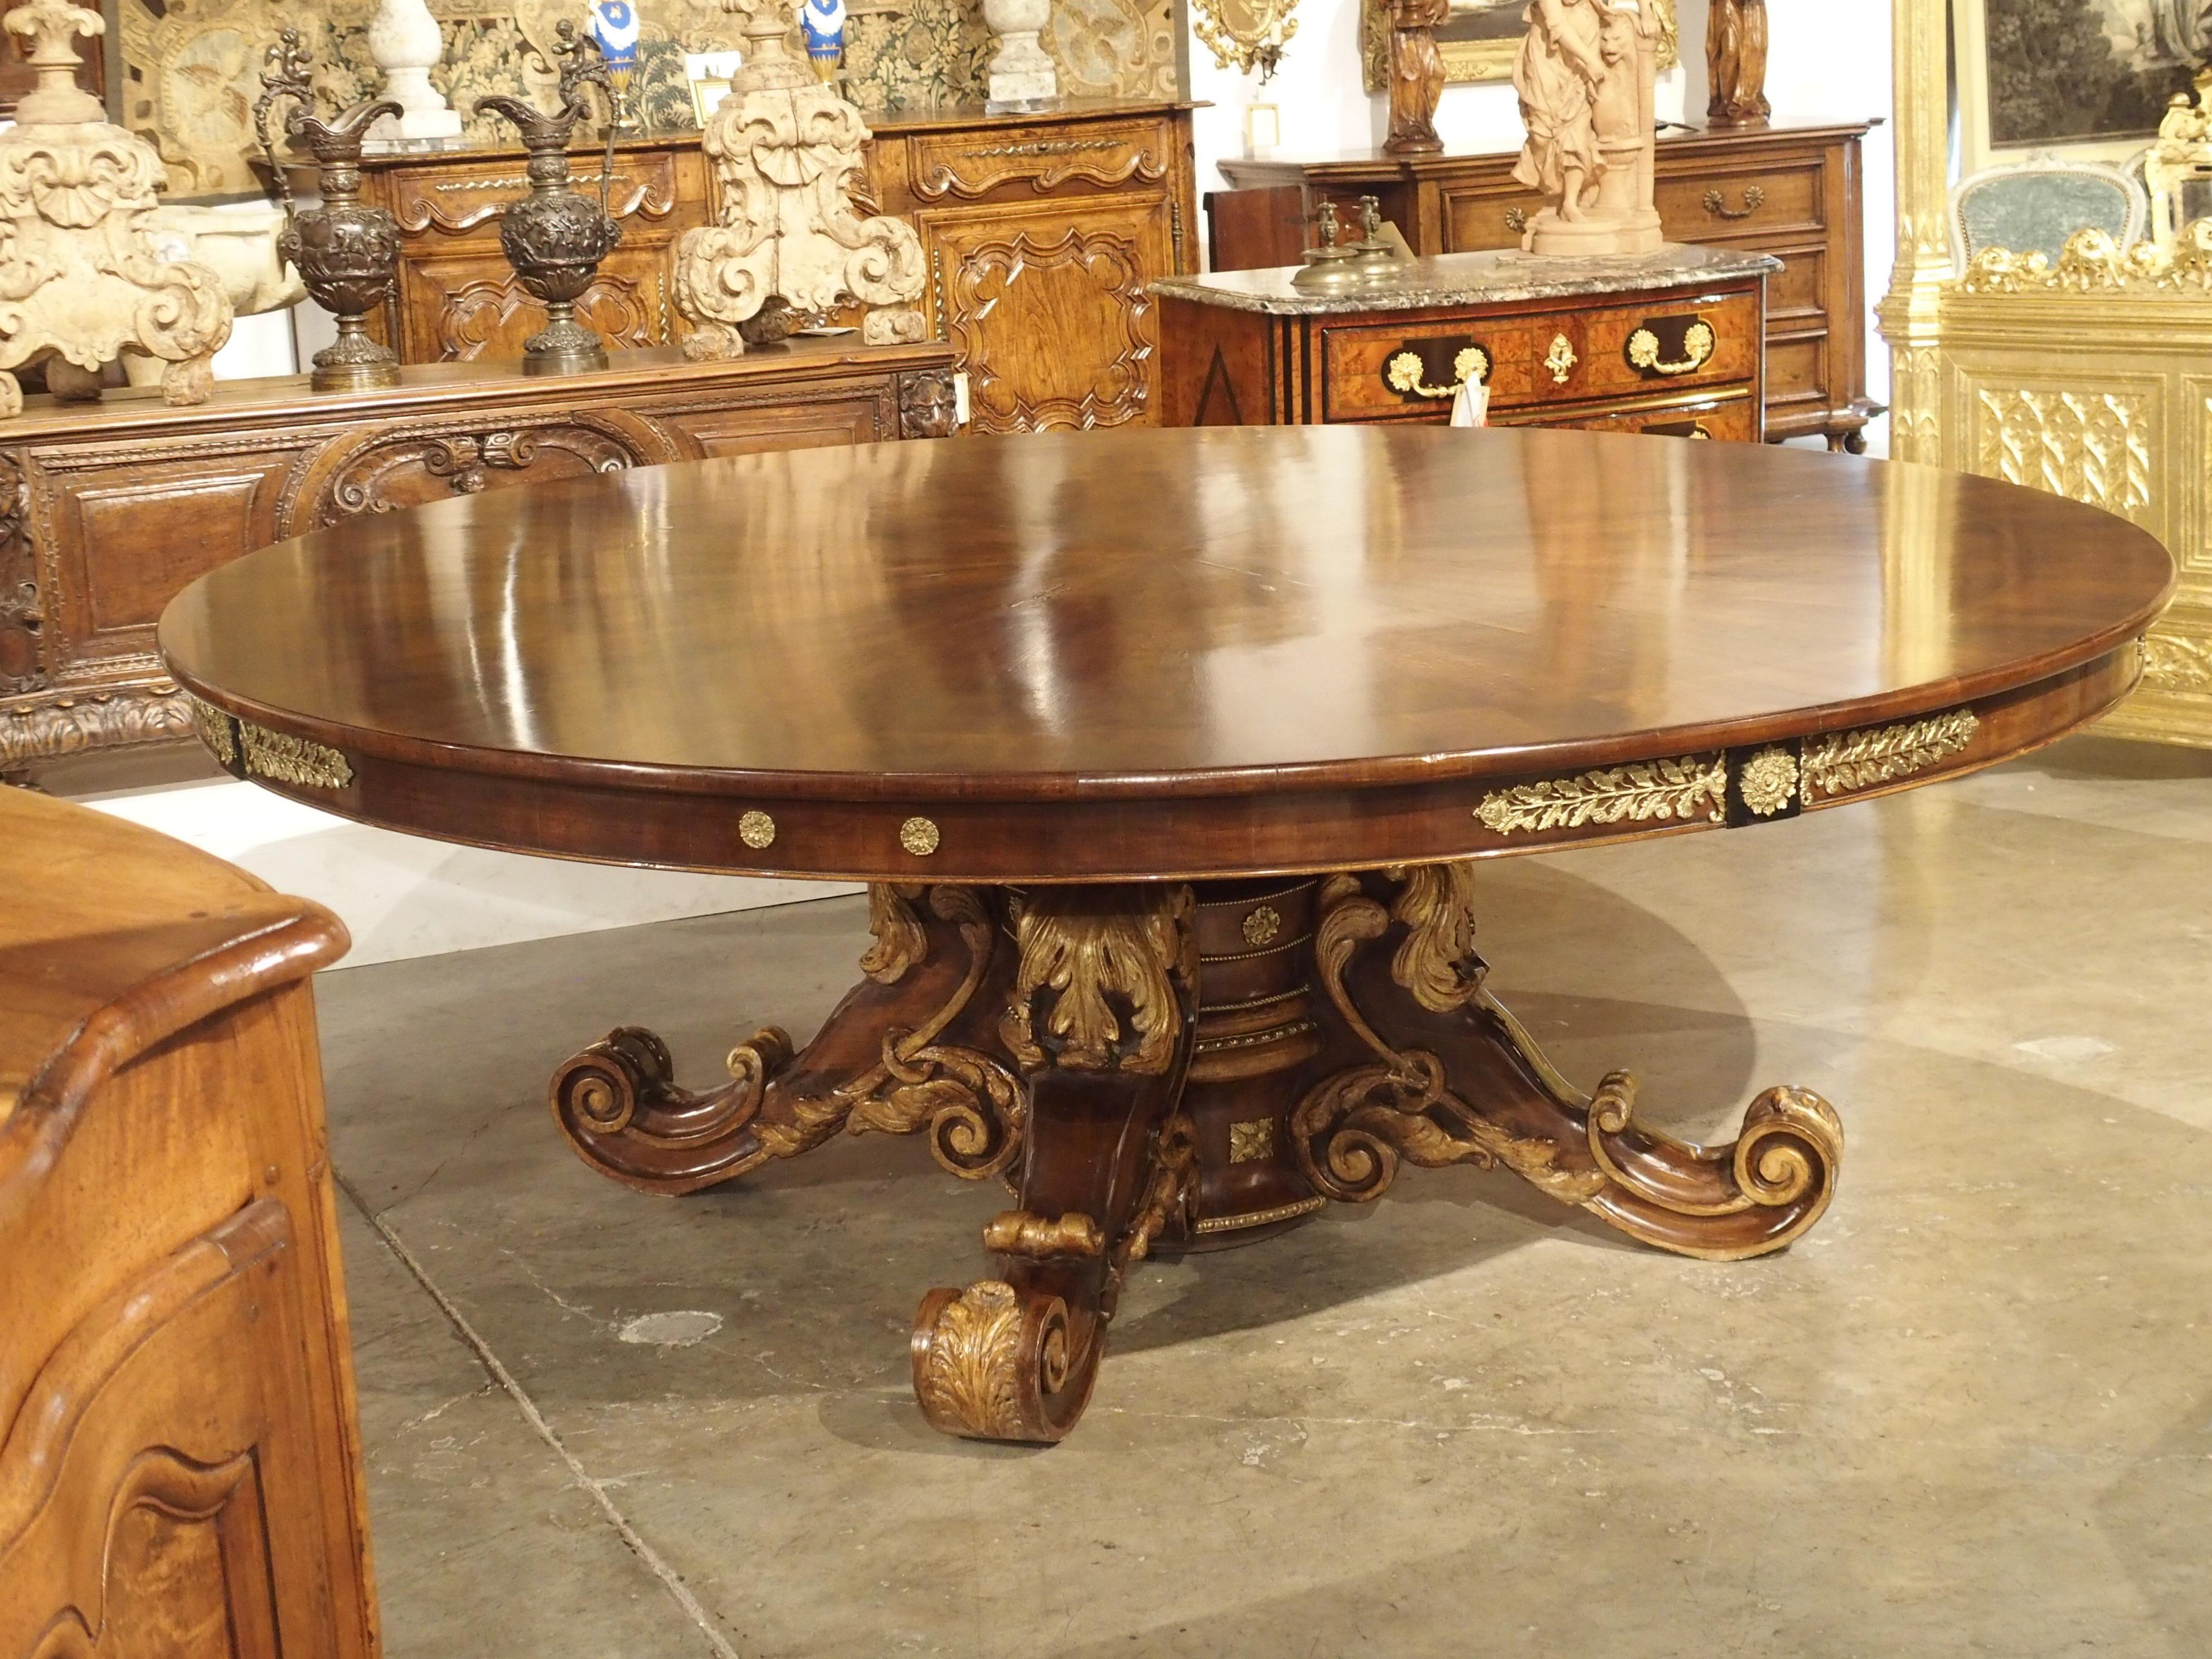 Made from walnut wood, walnut veneer and bronze doré embellishments, this large round table was produced in France at the end of the Restoration period, circa 1830.

The Bourbon Restoration is the 15-year period of recovery following the defeat of